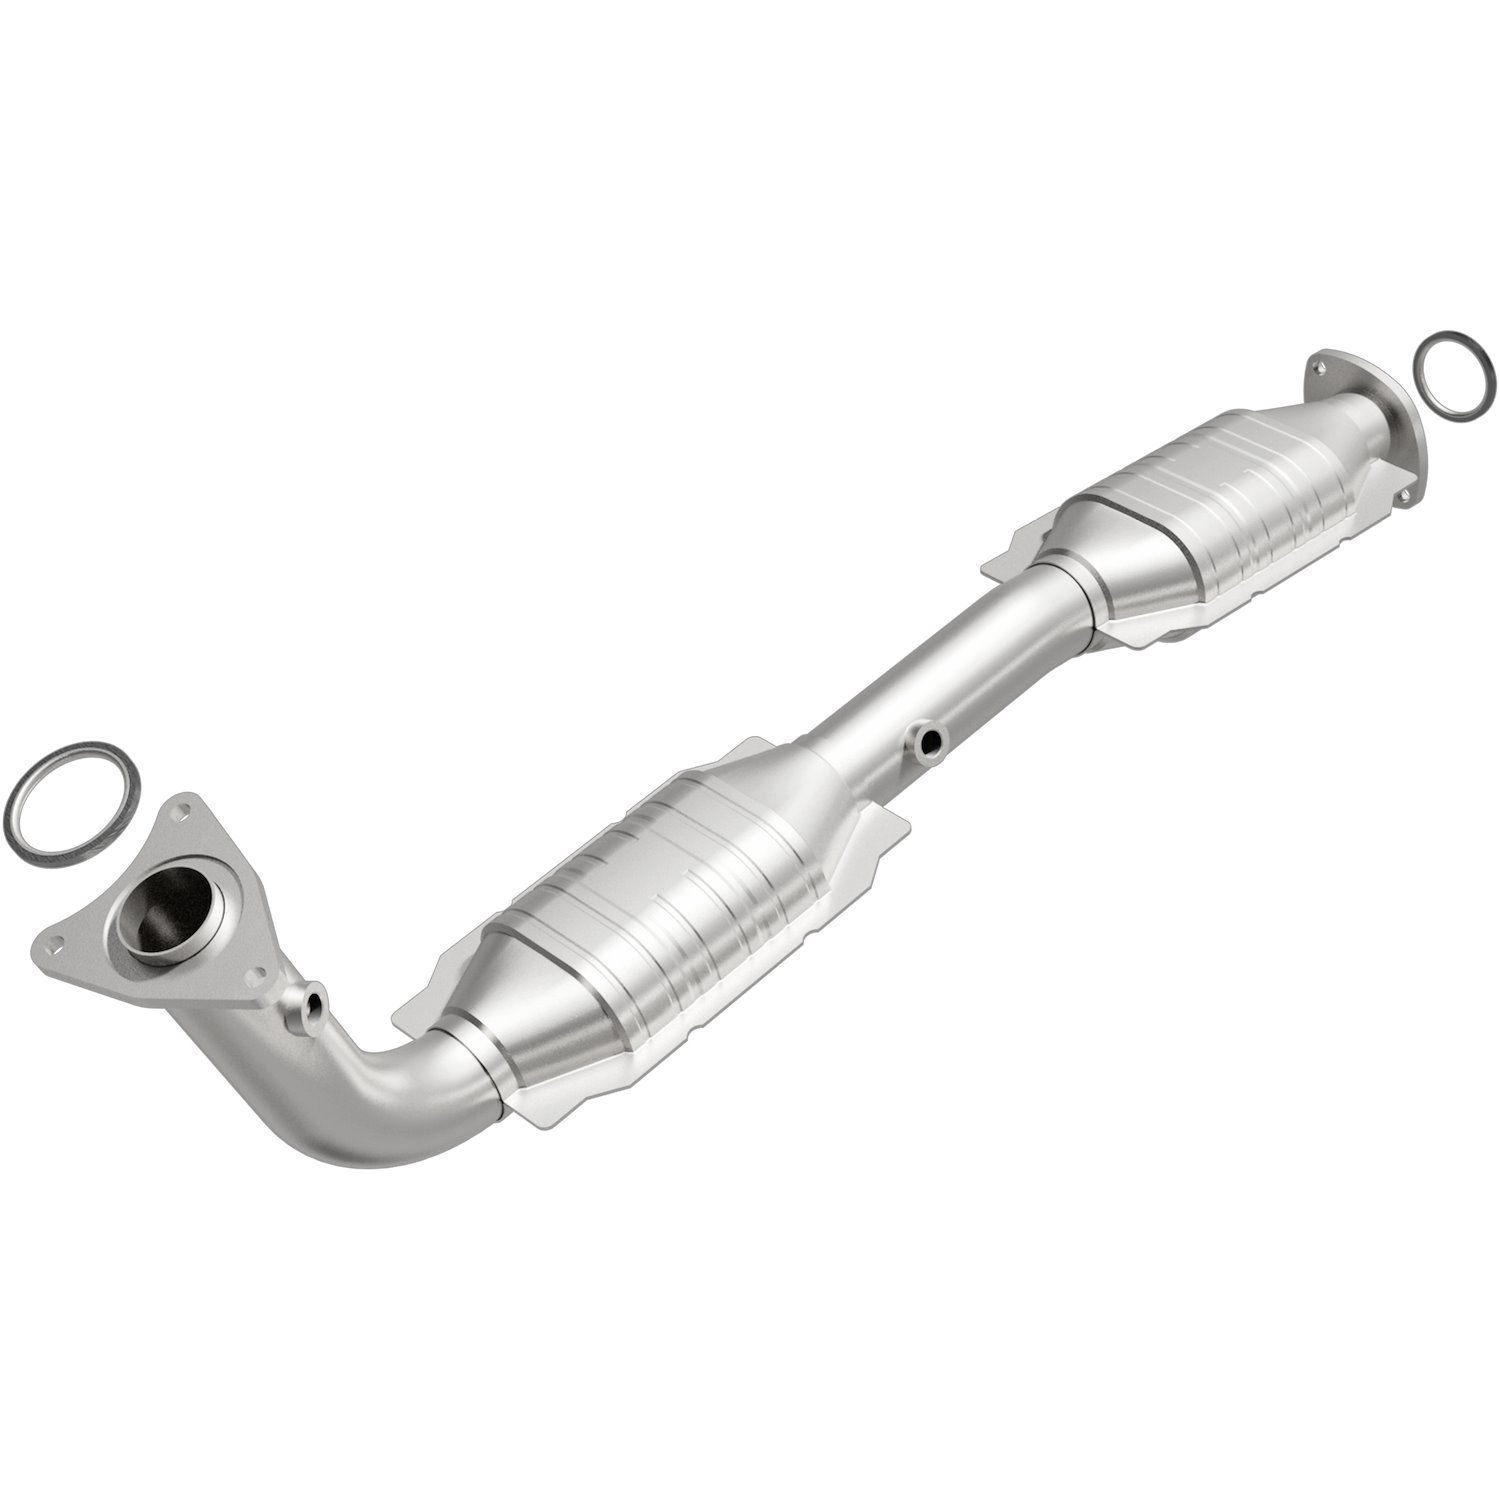 OEM Grade Federal / EPA Compliant Direct-Fit Catalytic Converter 49630